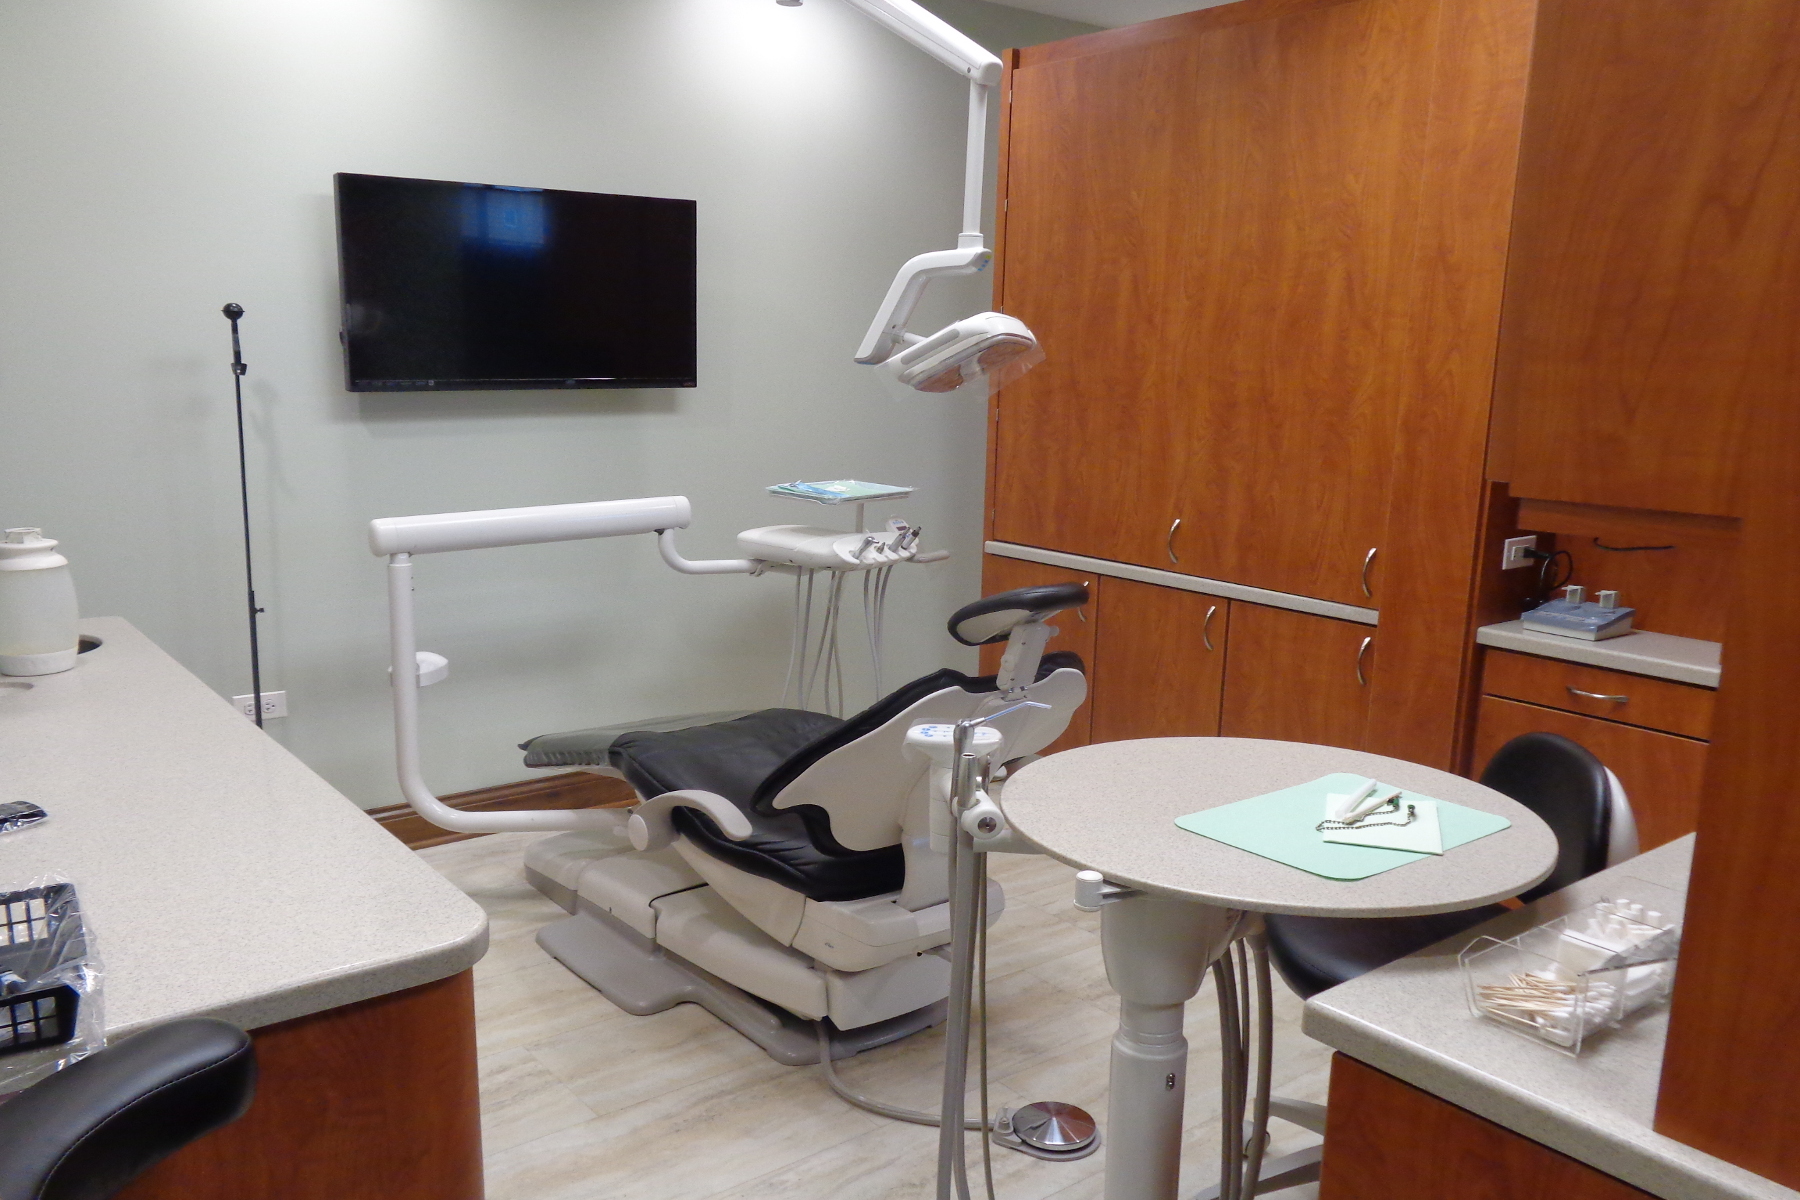 Examine Room - Family Care Dental Center, Chicago Custom Home. America's Custom Home Builders: New Construction, Remodeling, Restoration Services. Residential and Commercial.